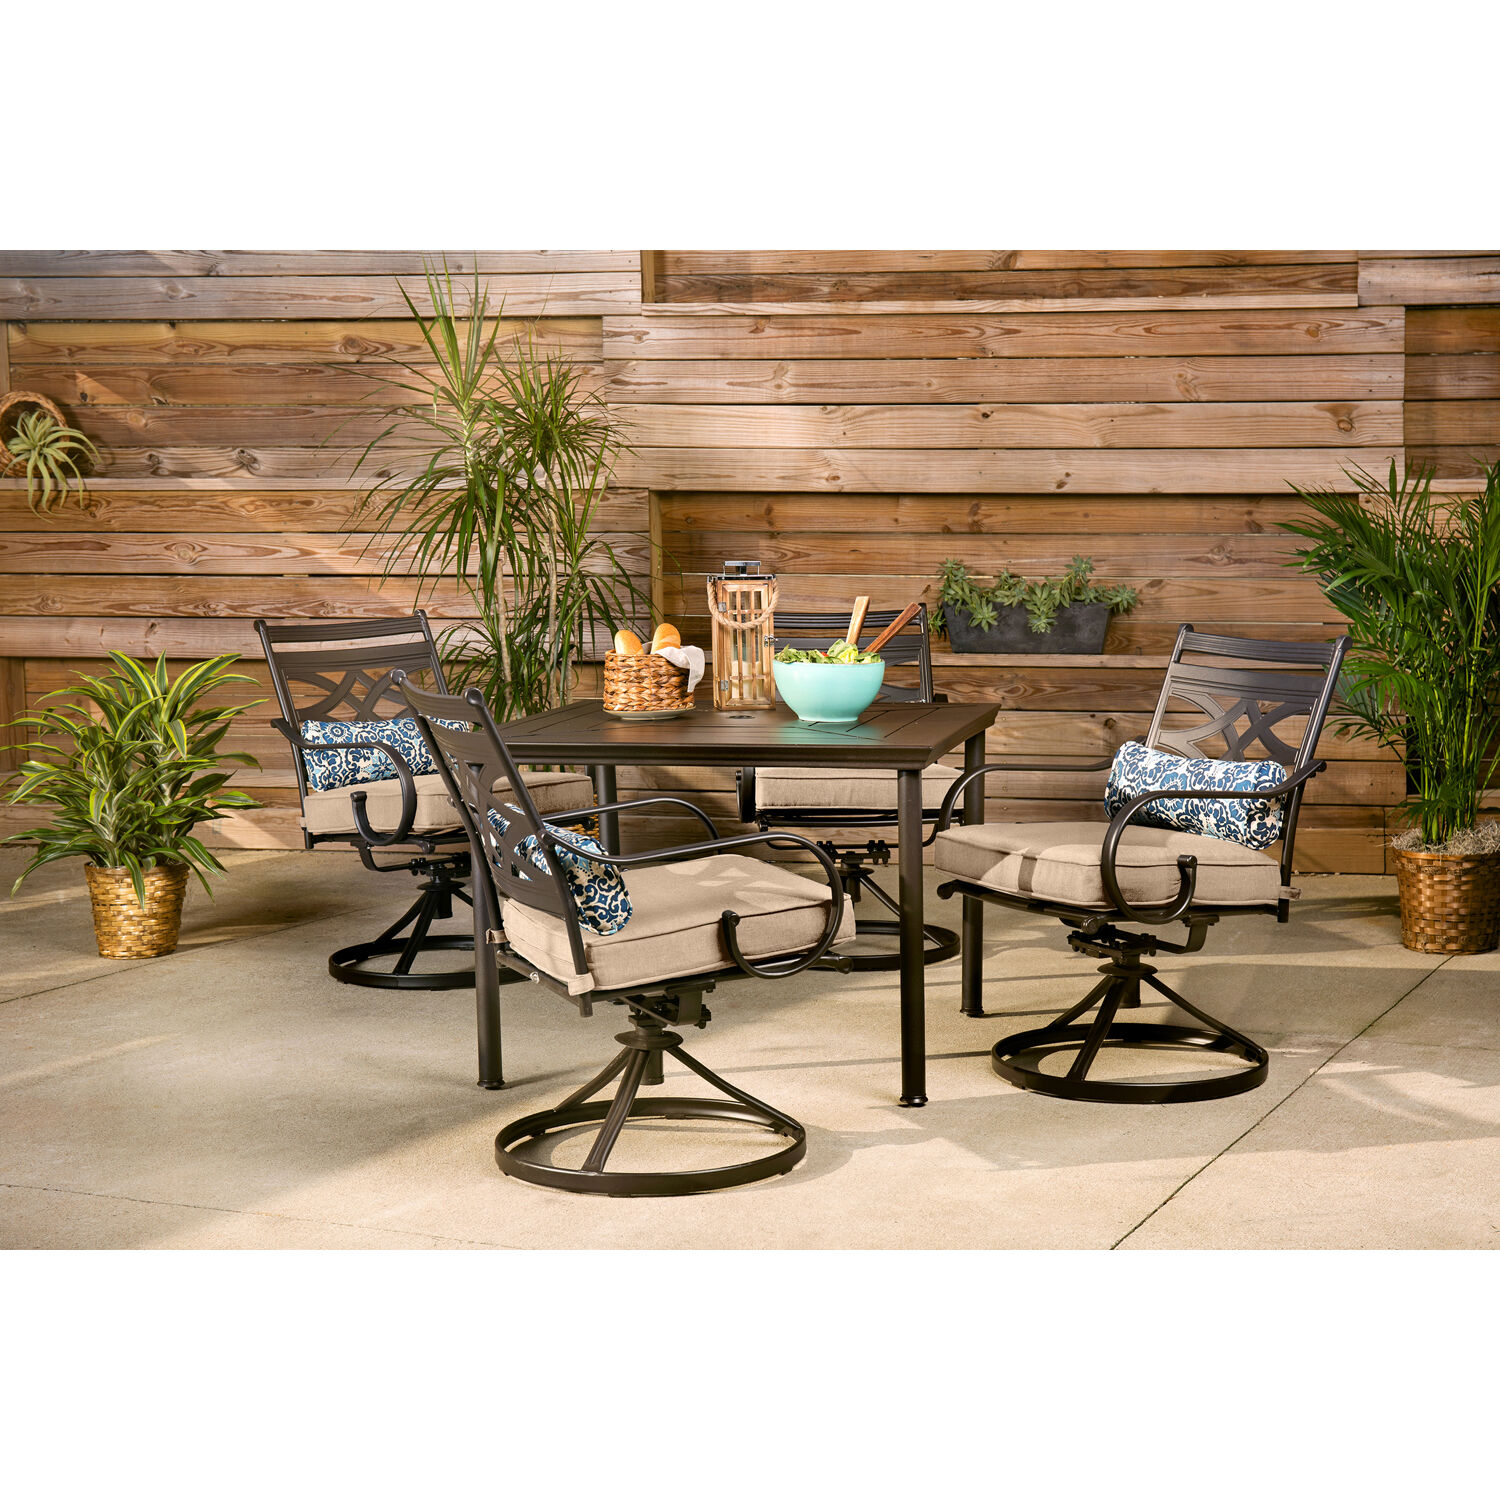 Hanover Montclair 5-Piece Steel Patio Dining Set in Tan with 4 Swivel Rockers and a Square Table - image 3 of 12